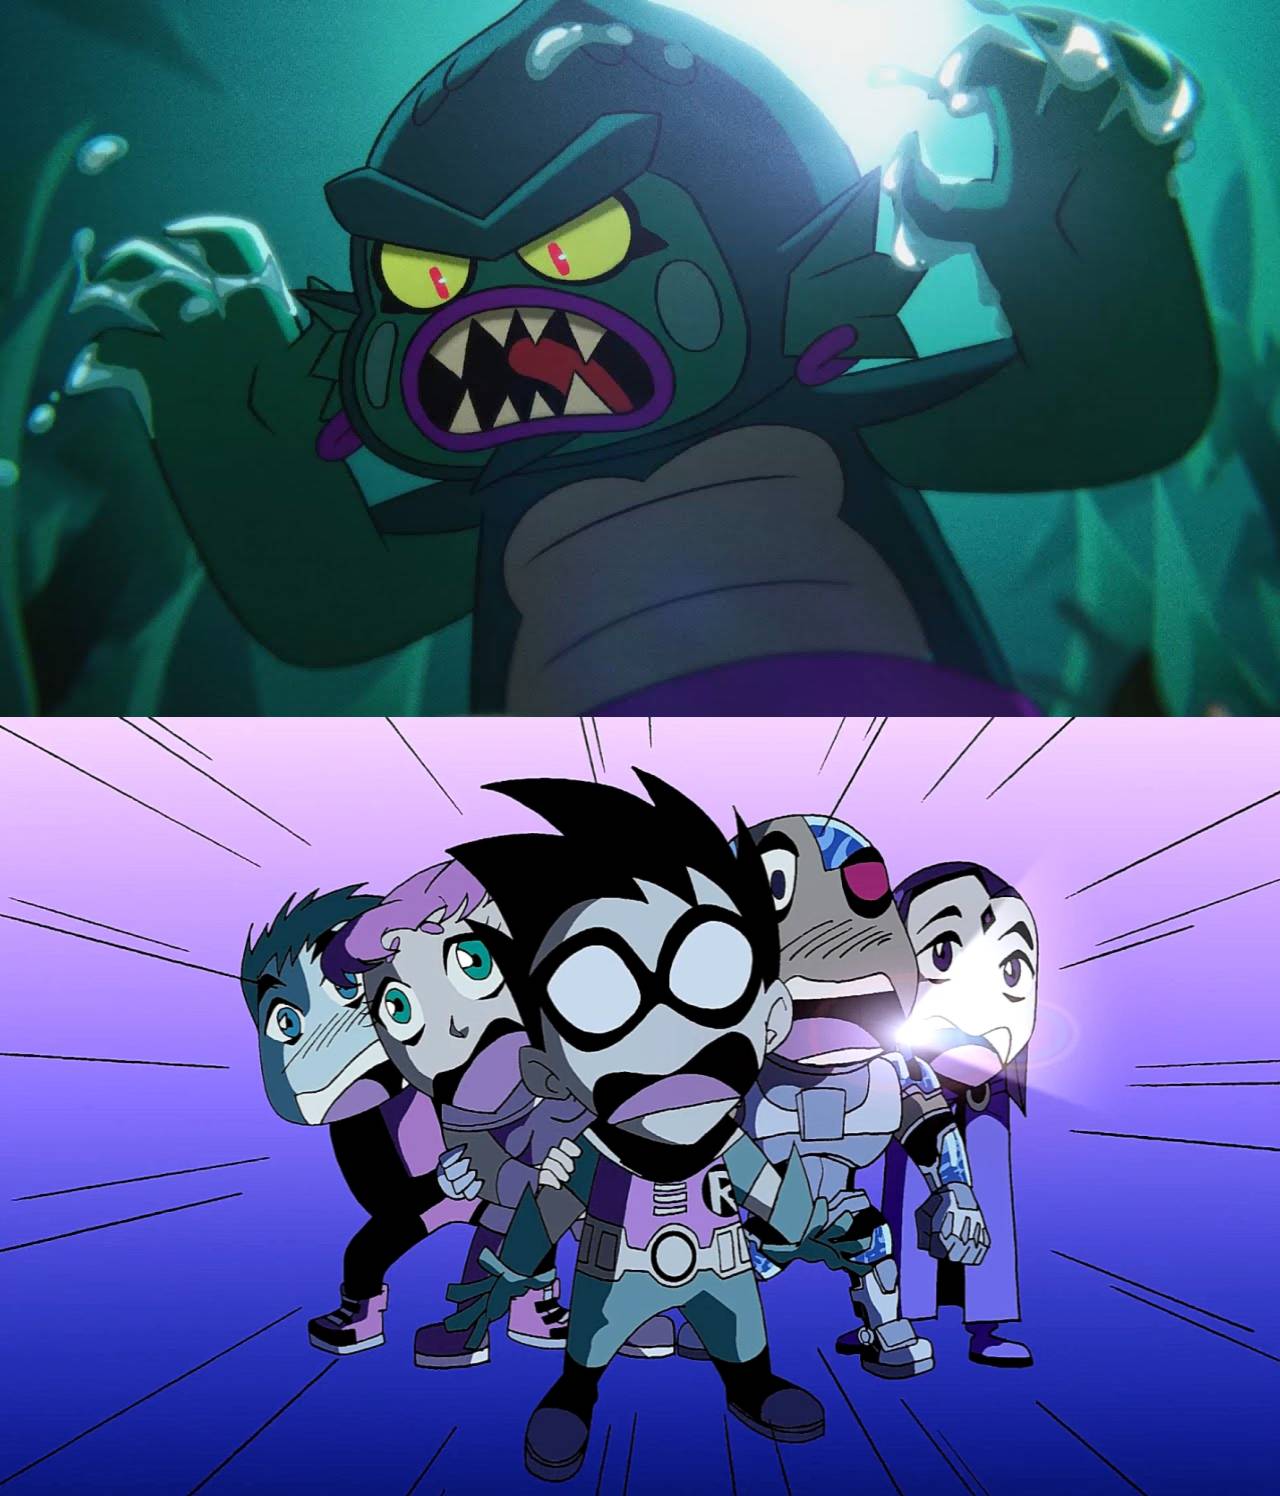 Teen Titans Go ! Swamp Attack - Play UNBLOCKED Teen Titans Go ! Swamp  Attack on DooDooLove